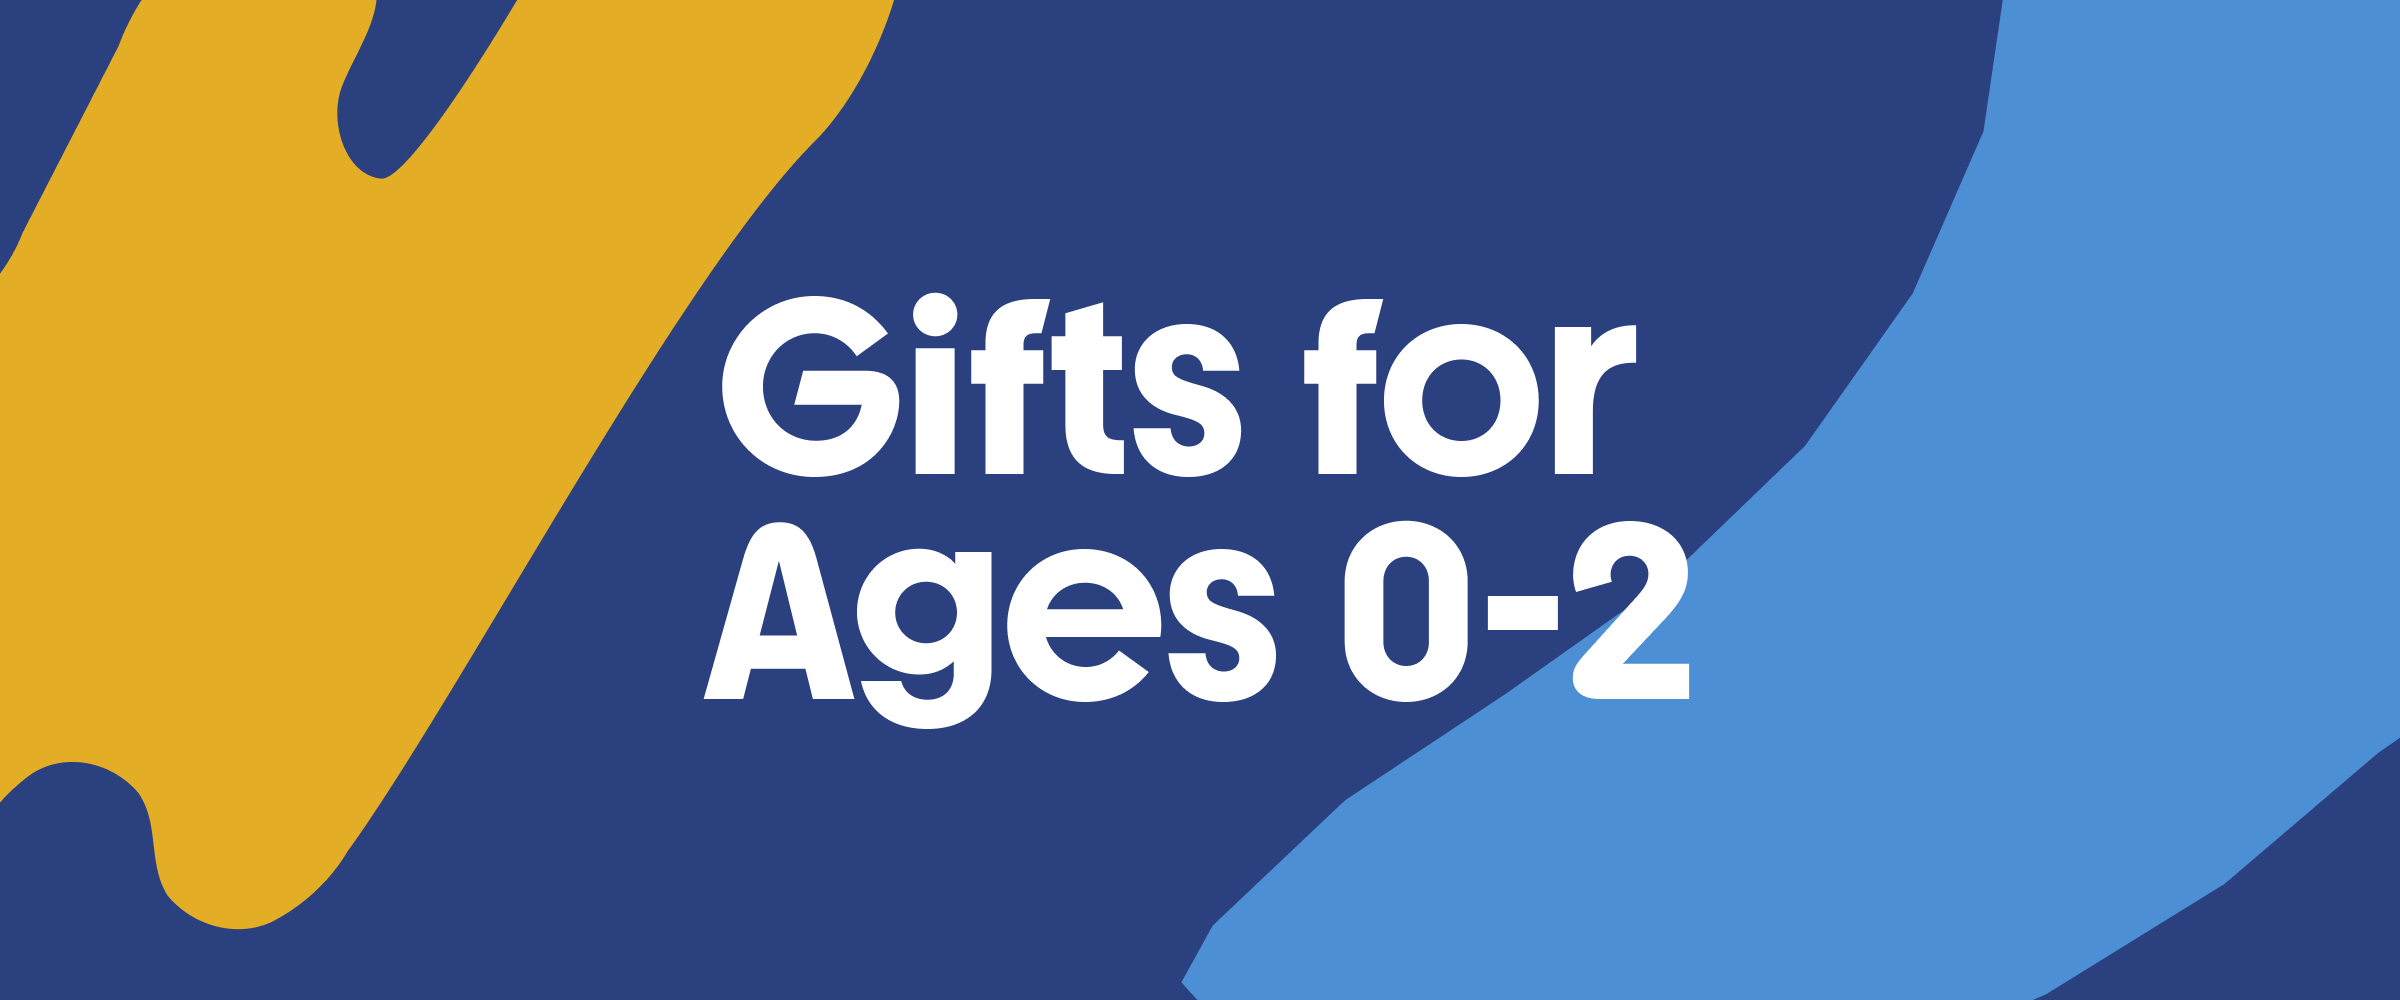 Shop Gifts for Ages 0-2